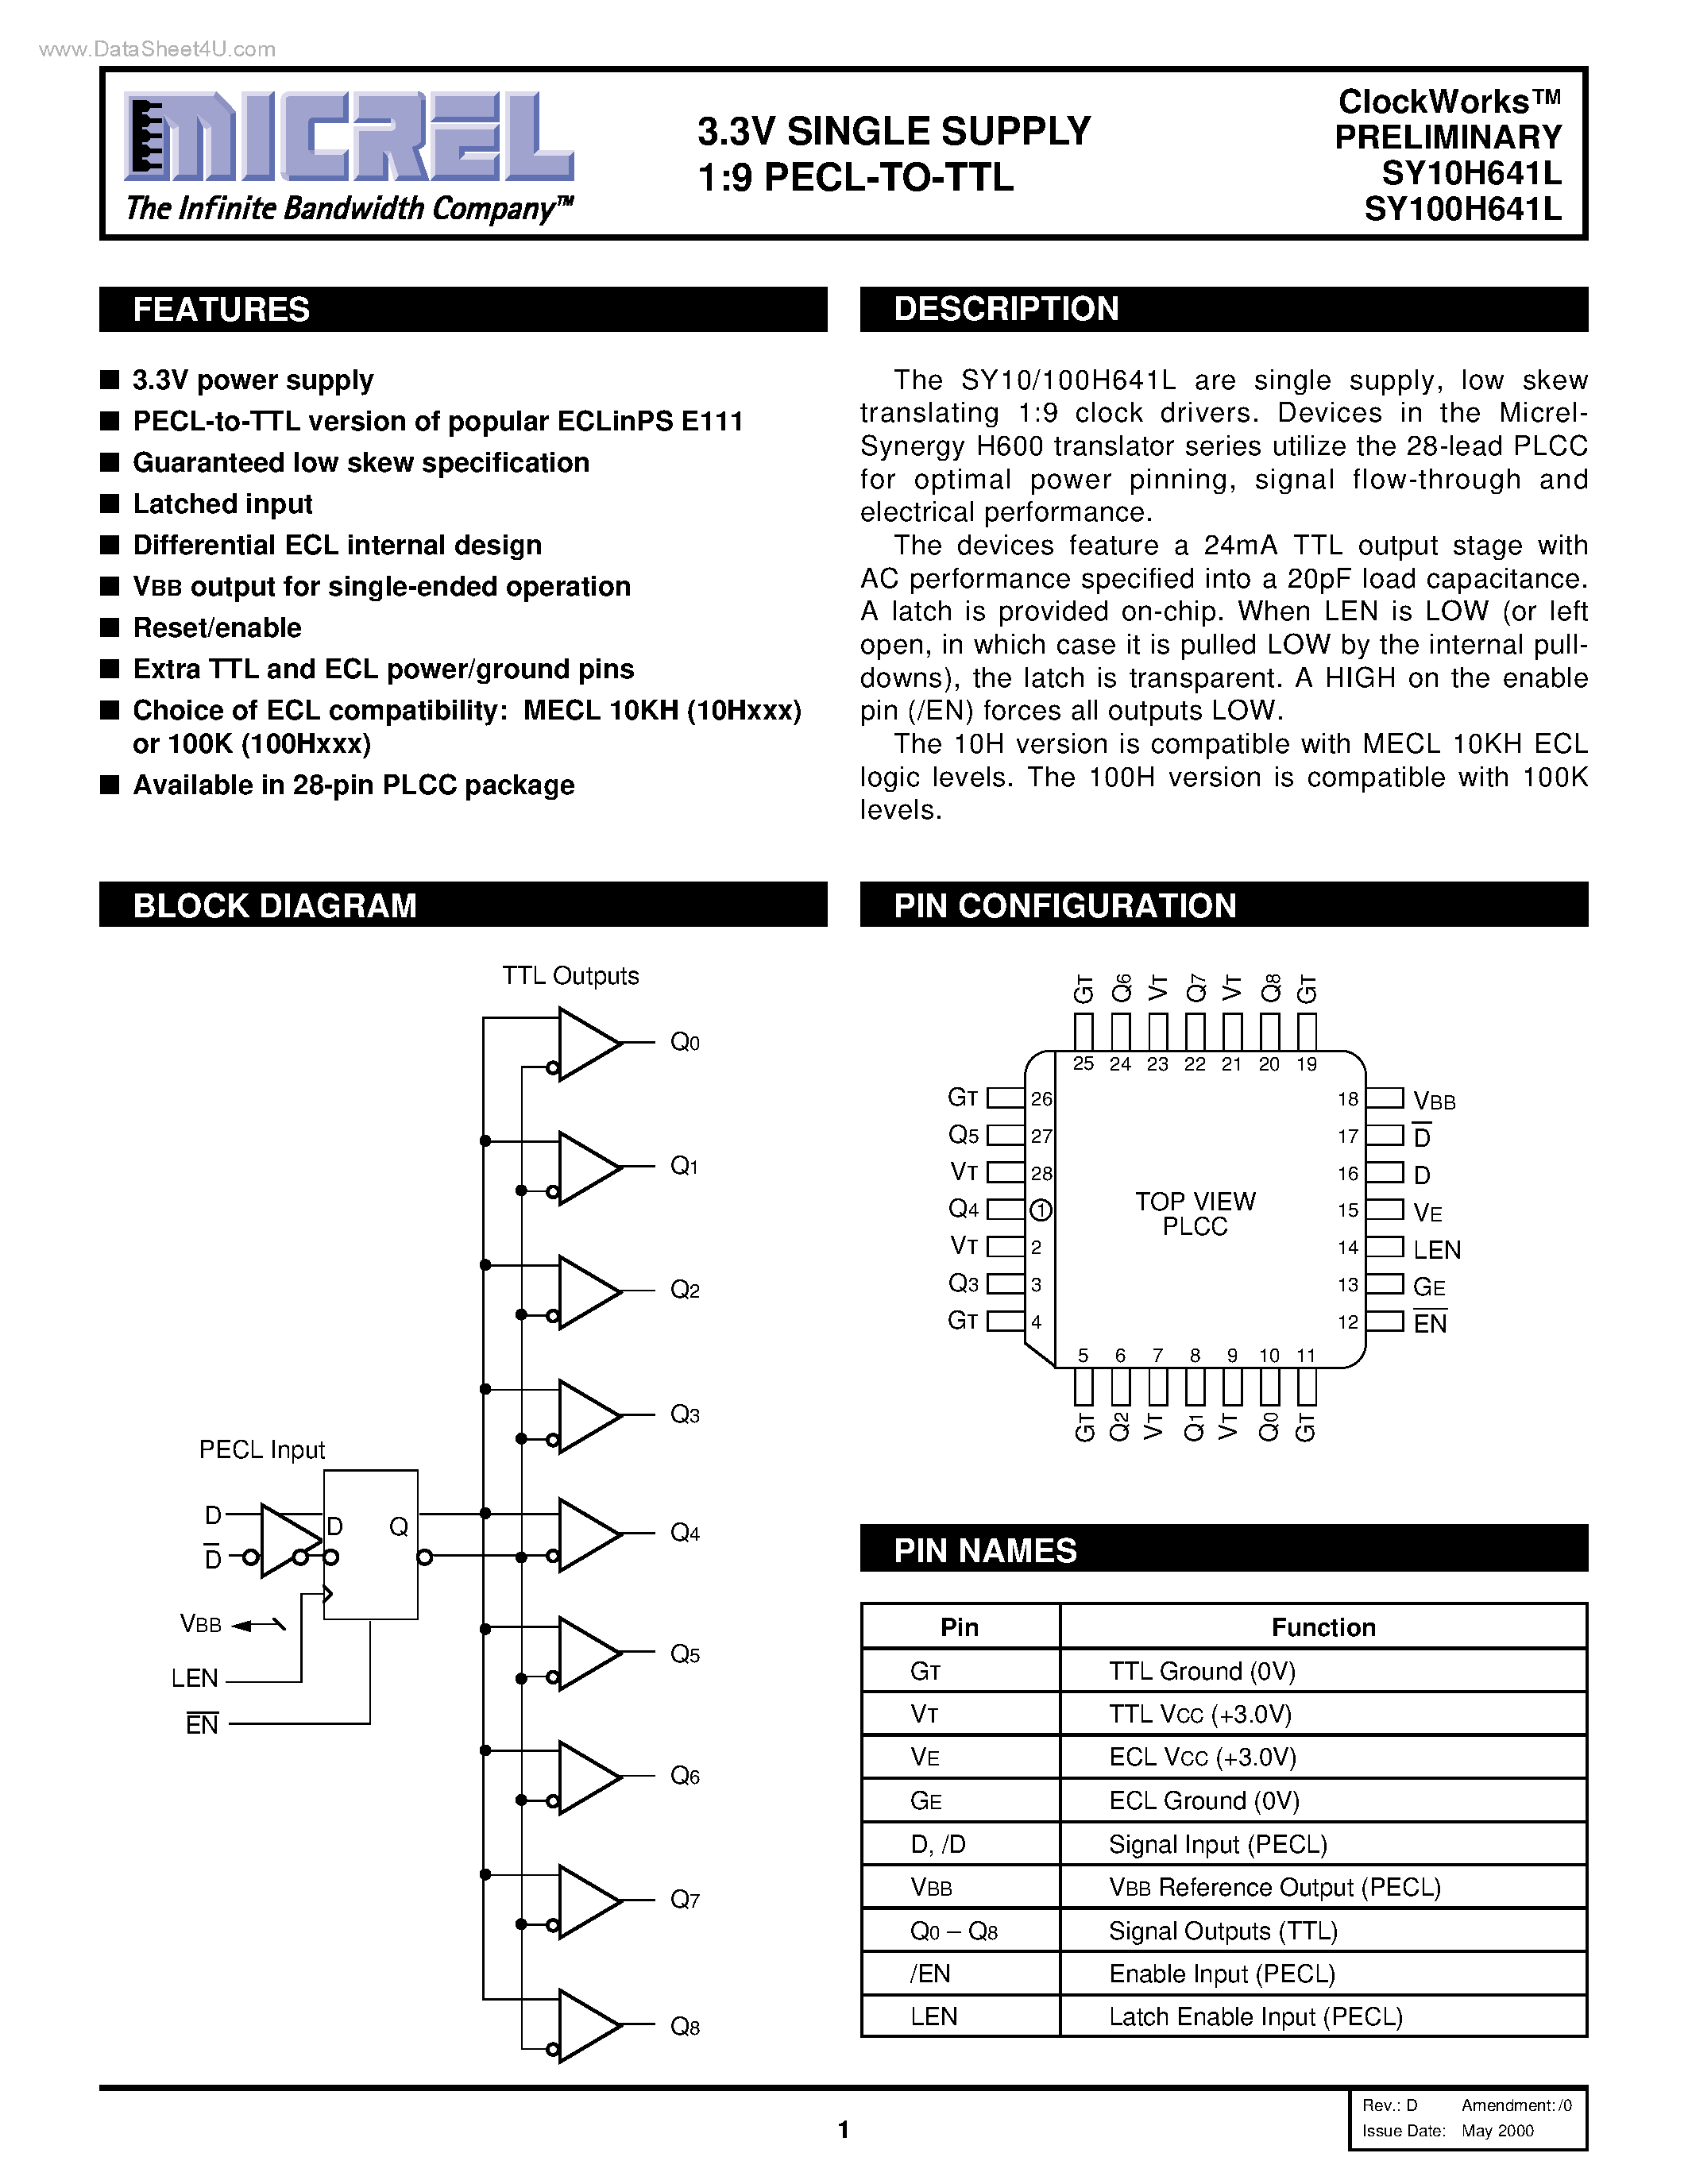 Datasheet SY100H641L - 3.3V SINGLE SUPPLY 1:9 PECL-TO-TTL page 1